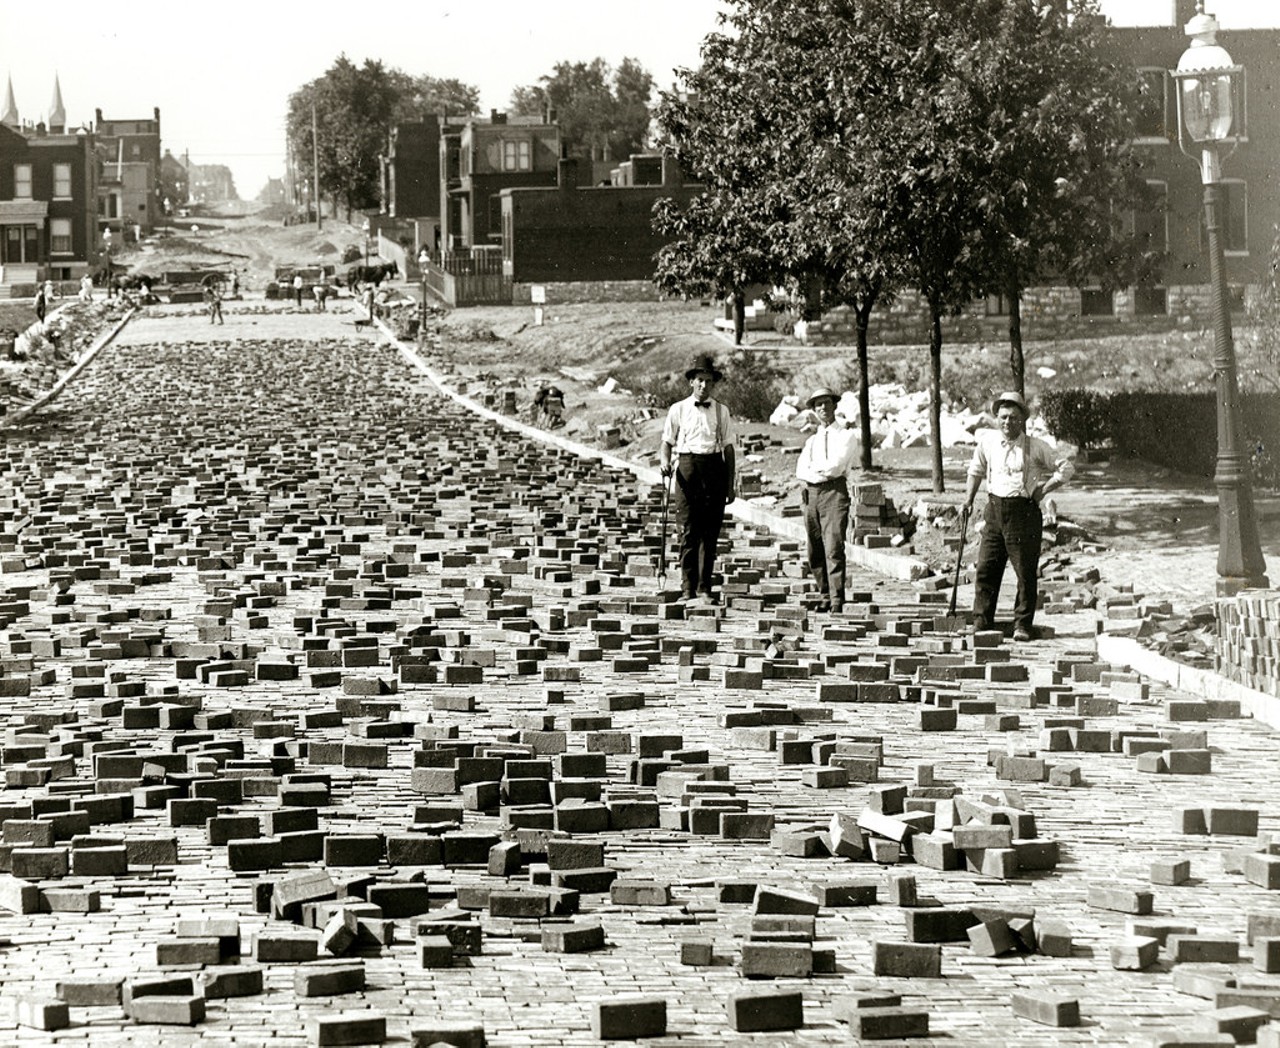 Street pavers at work on Compton Avenue north of Meramec Street, 1906. The distinctive pyramidal towers of St. Anthony of Padua can be seen in the distance at left.